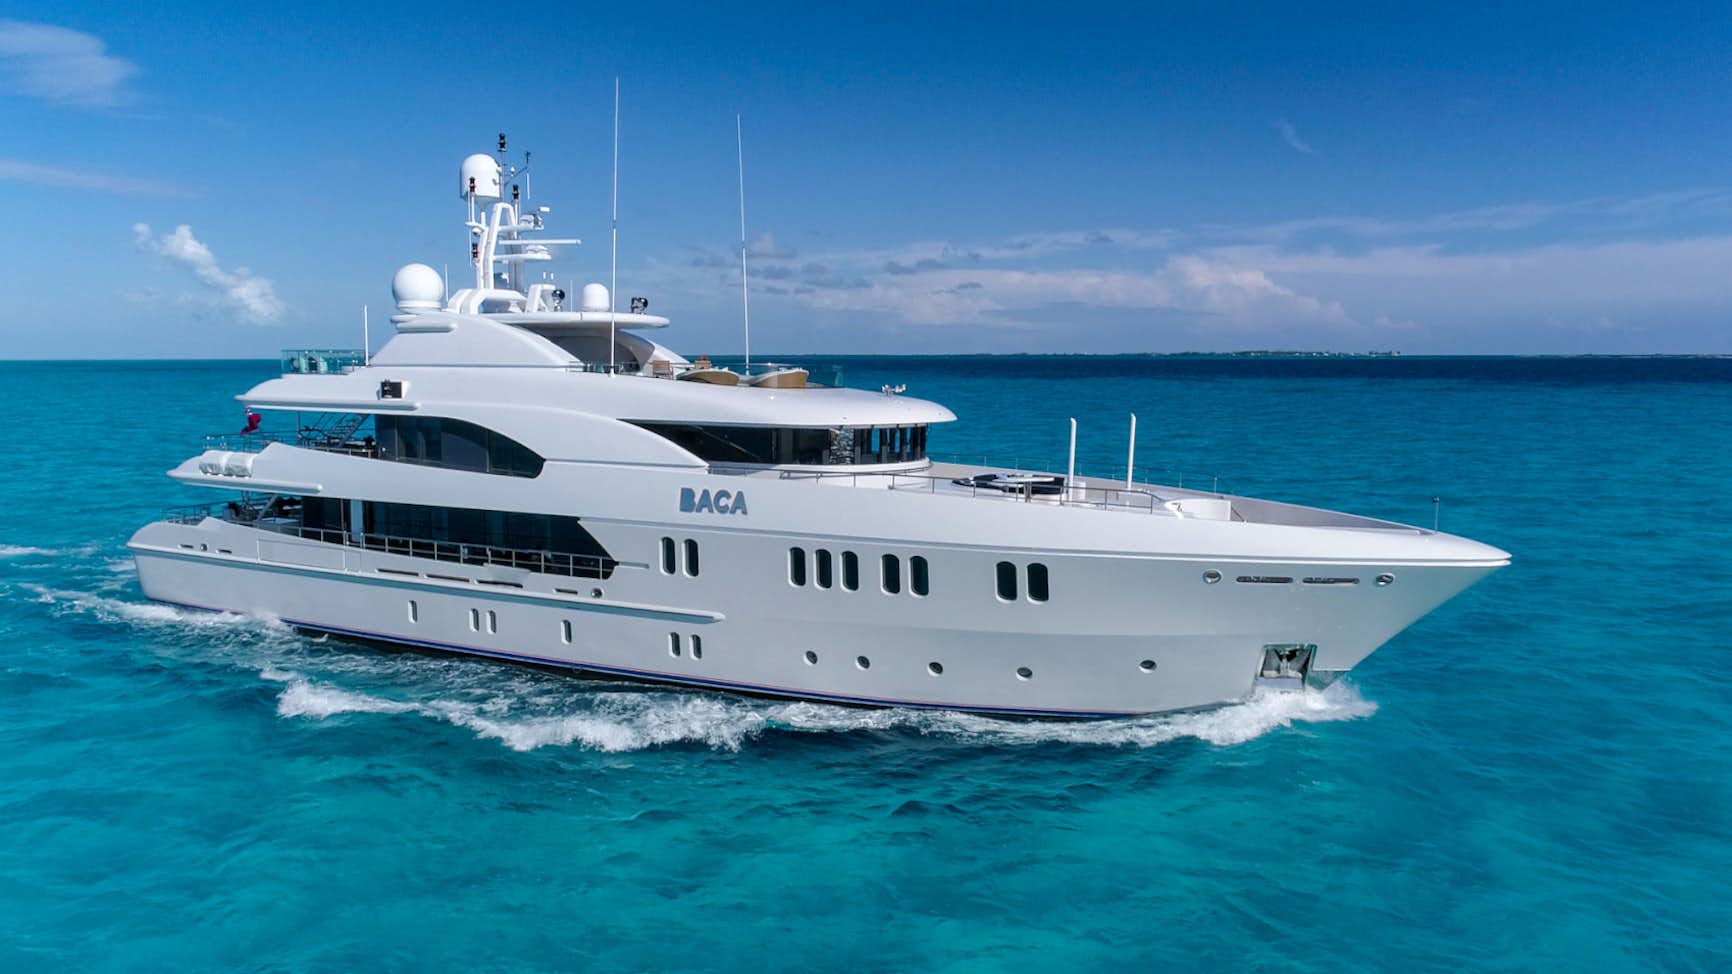 Watch Video for BACA Yacht for Charter